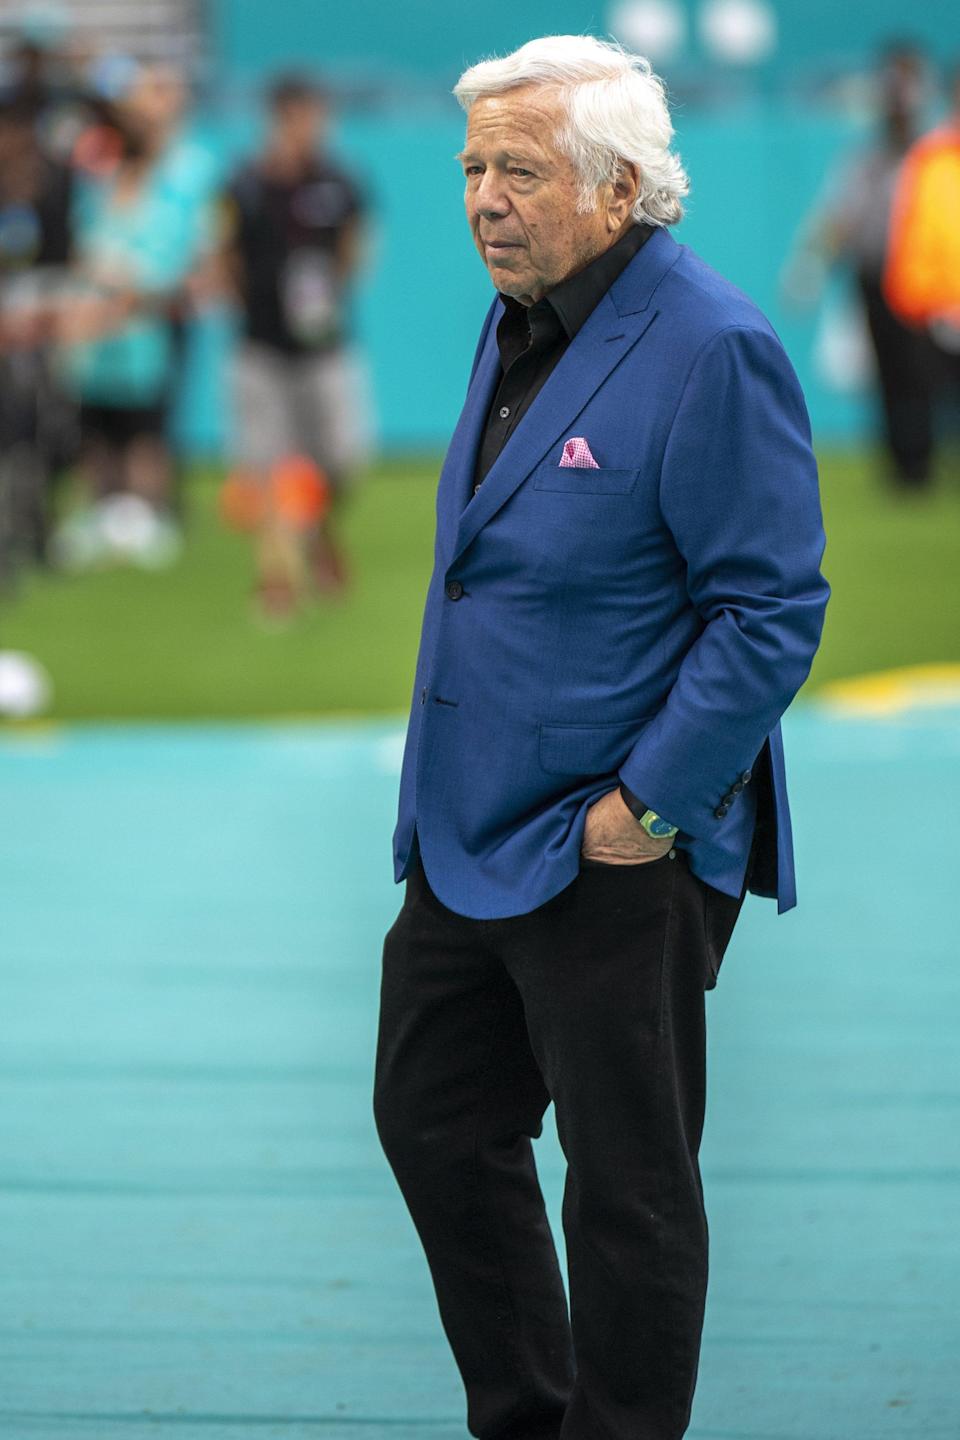 New England Patriots owner Robert Kraft stands on the sidelines before an NFL football game against the Miami Dolphins, Sunday, Jan. 9, 2022, in Miami Gardens, Fla. (AP Photo/Doug Murray)